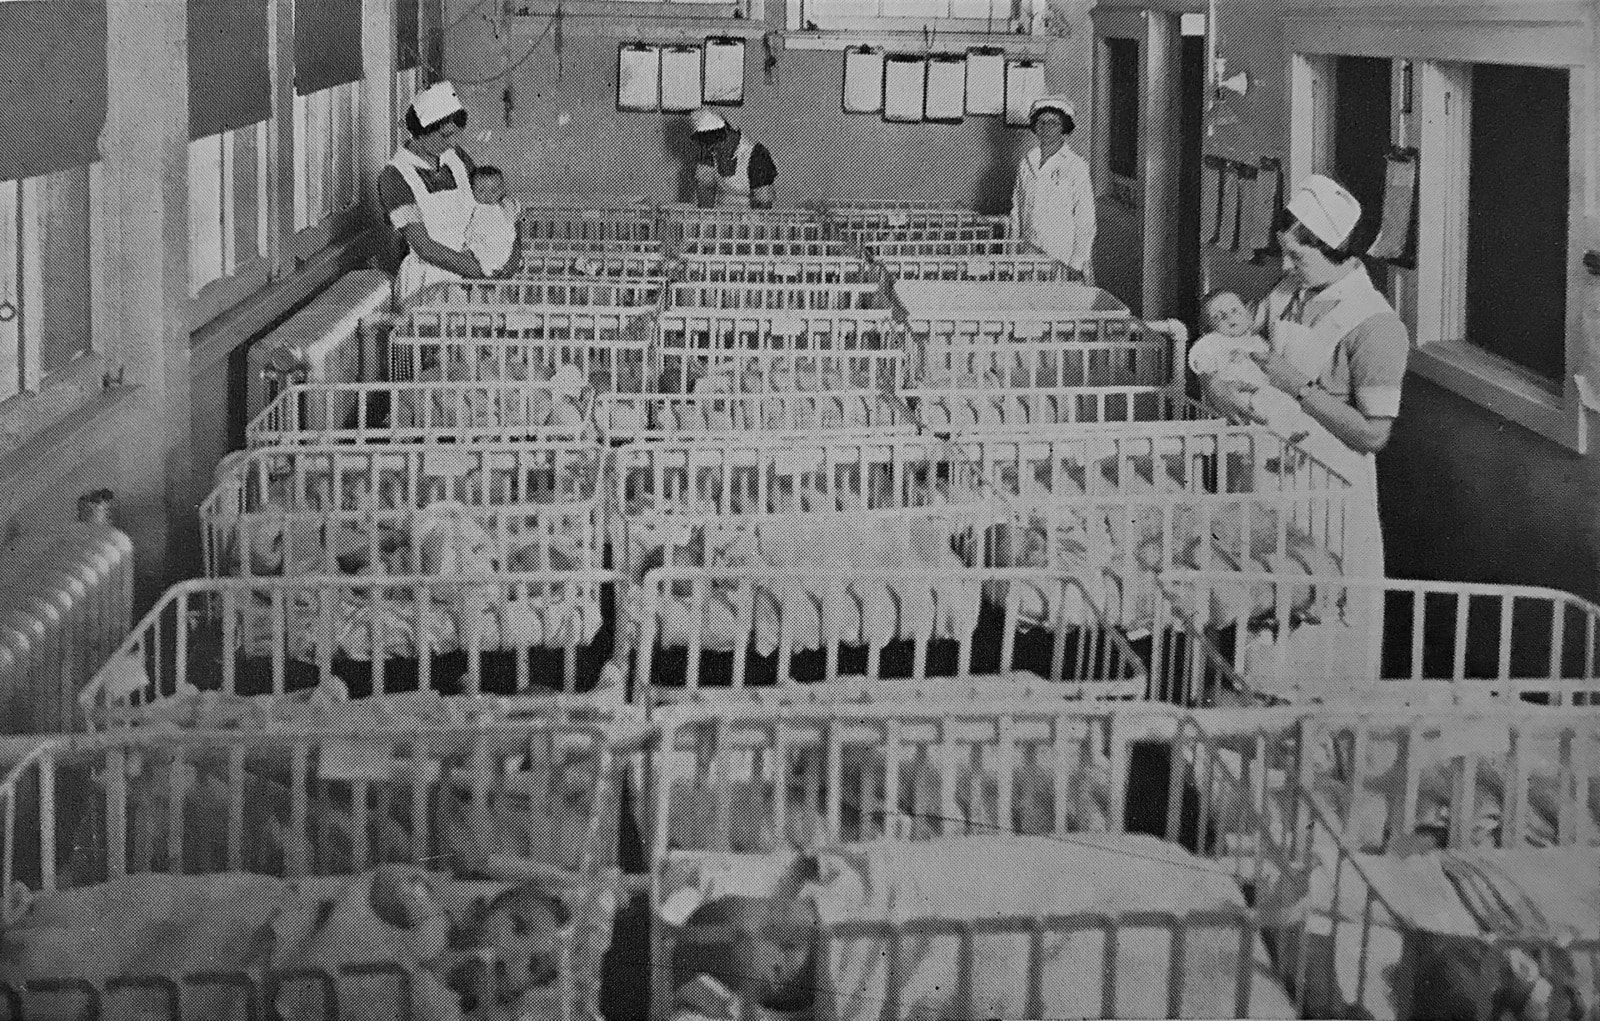 One of the nurseries at The Willows. The facility had space for as many as 125 babies at a time.